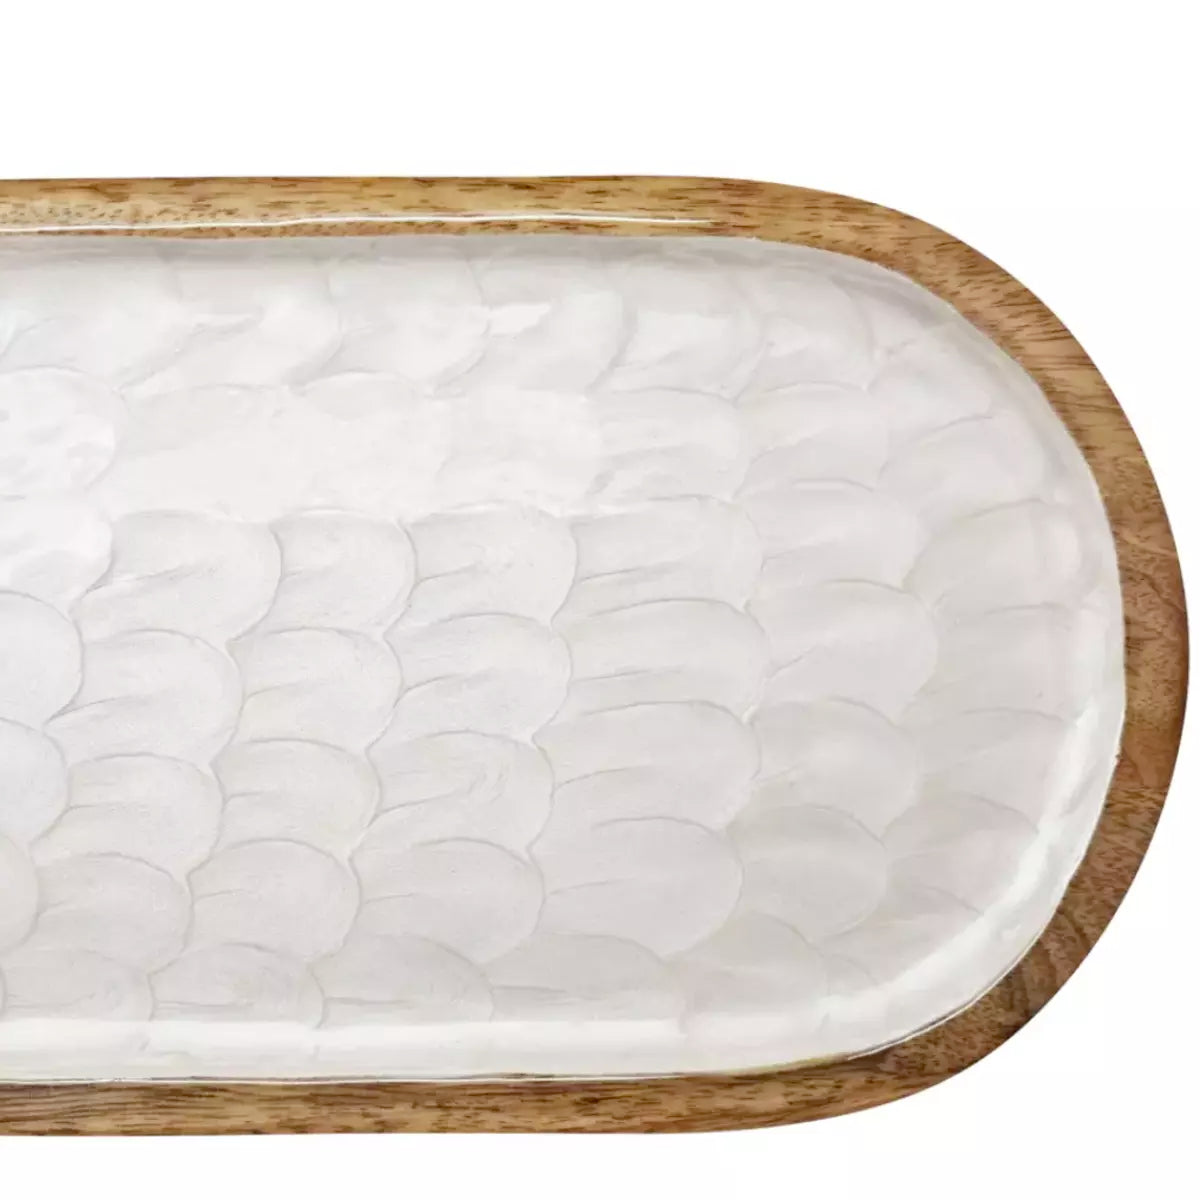 A white Como Oval Serving Tray with a wooden frame, featuring an embossed pearl design by j.elliot.